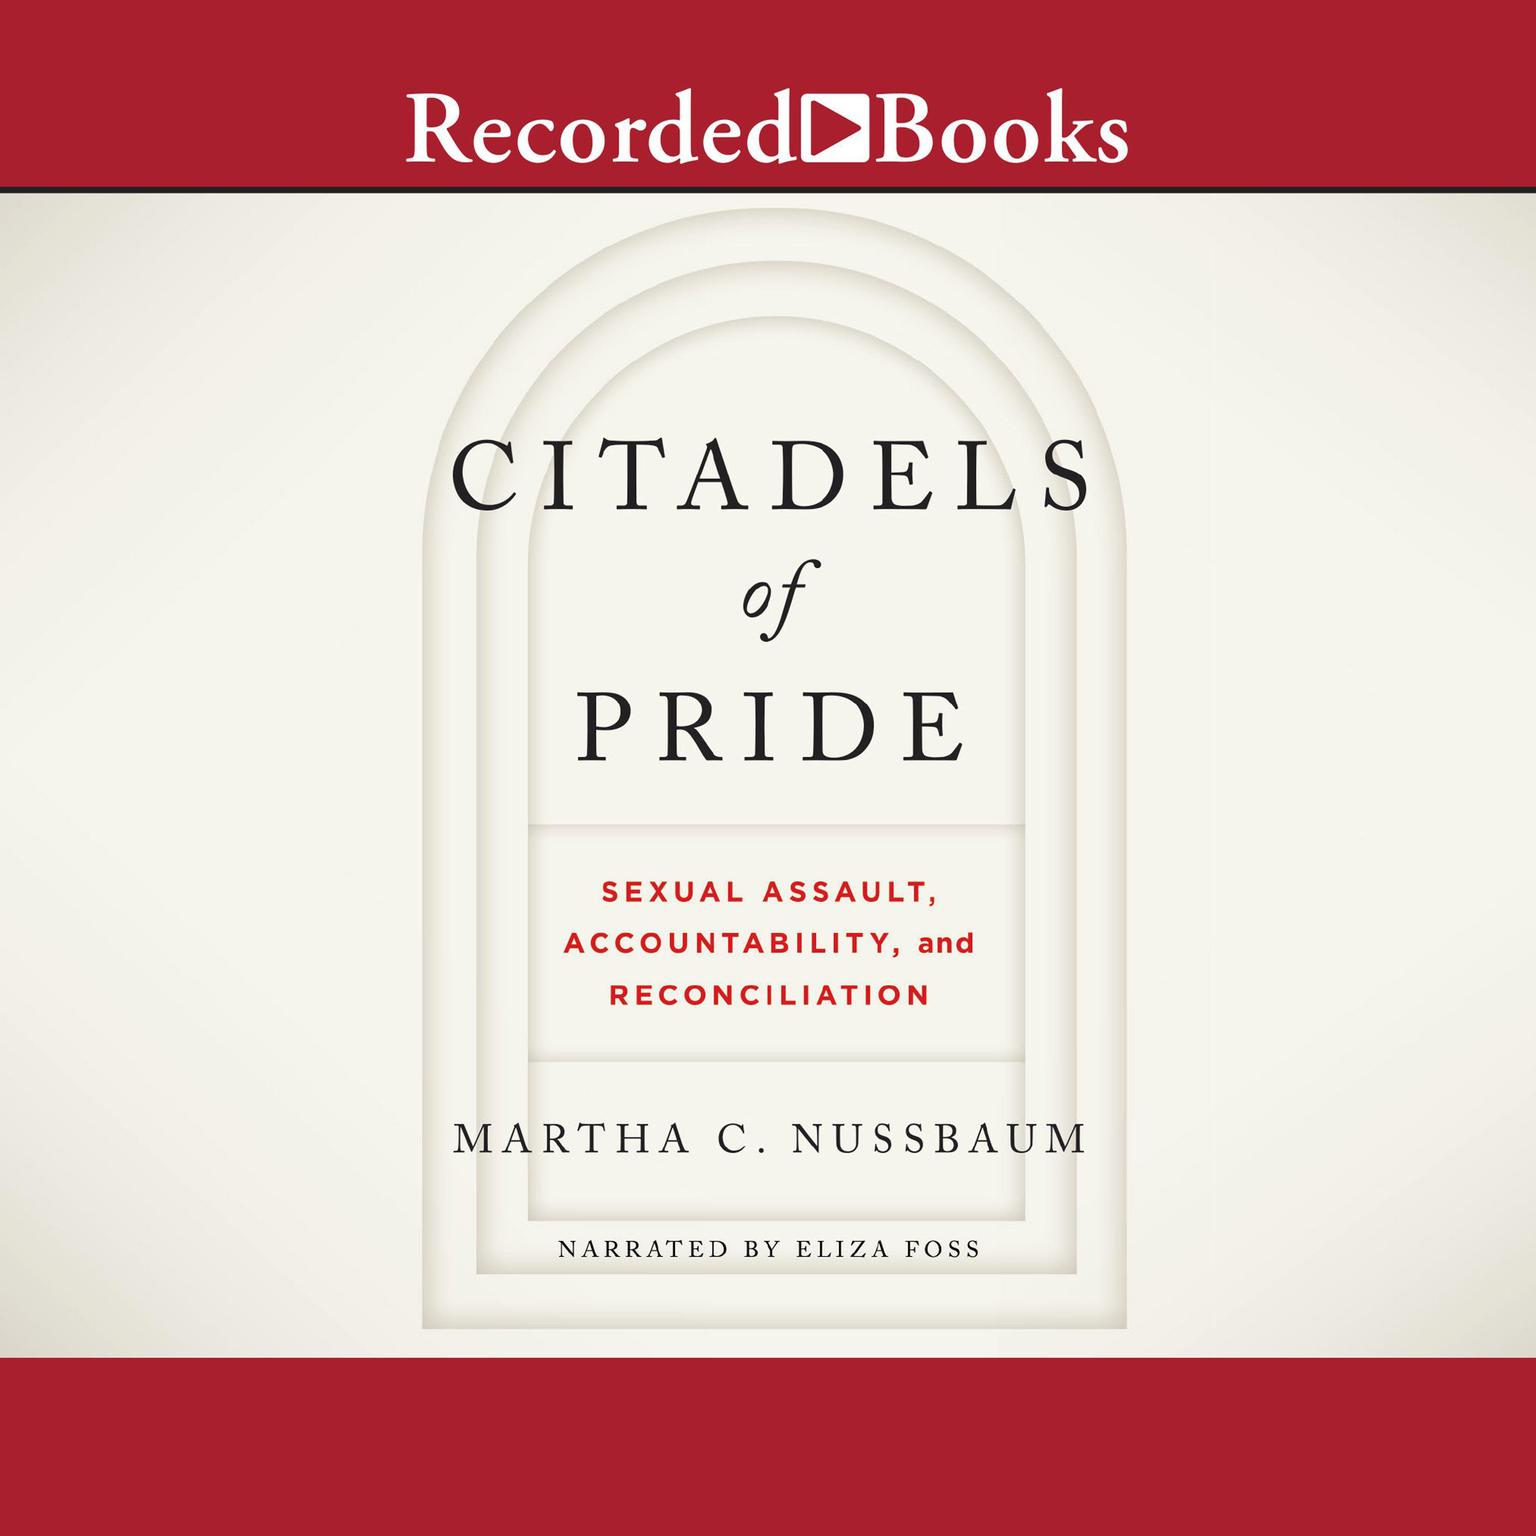 Citadels of Pride: Sexual Assault, Accountability, and Reconciliation  Audiobook, by Martha C. Nussbaum